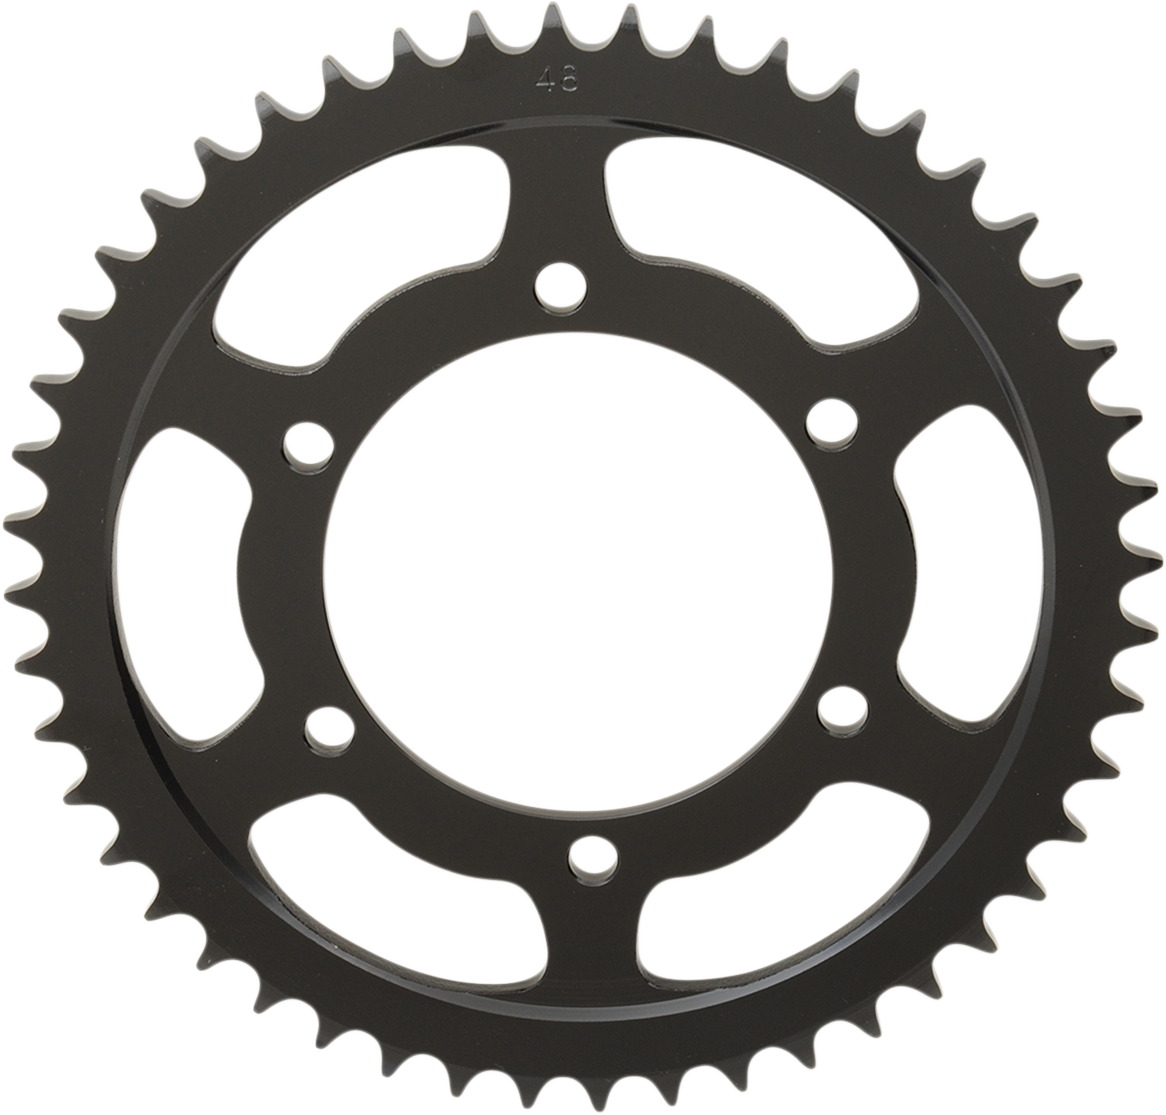 PARTS UNLIMITED - SPROCKET REAR YAM 530 48T